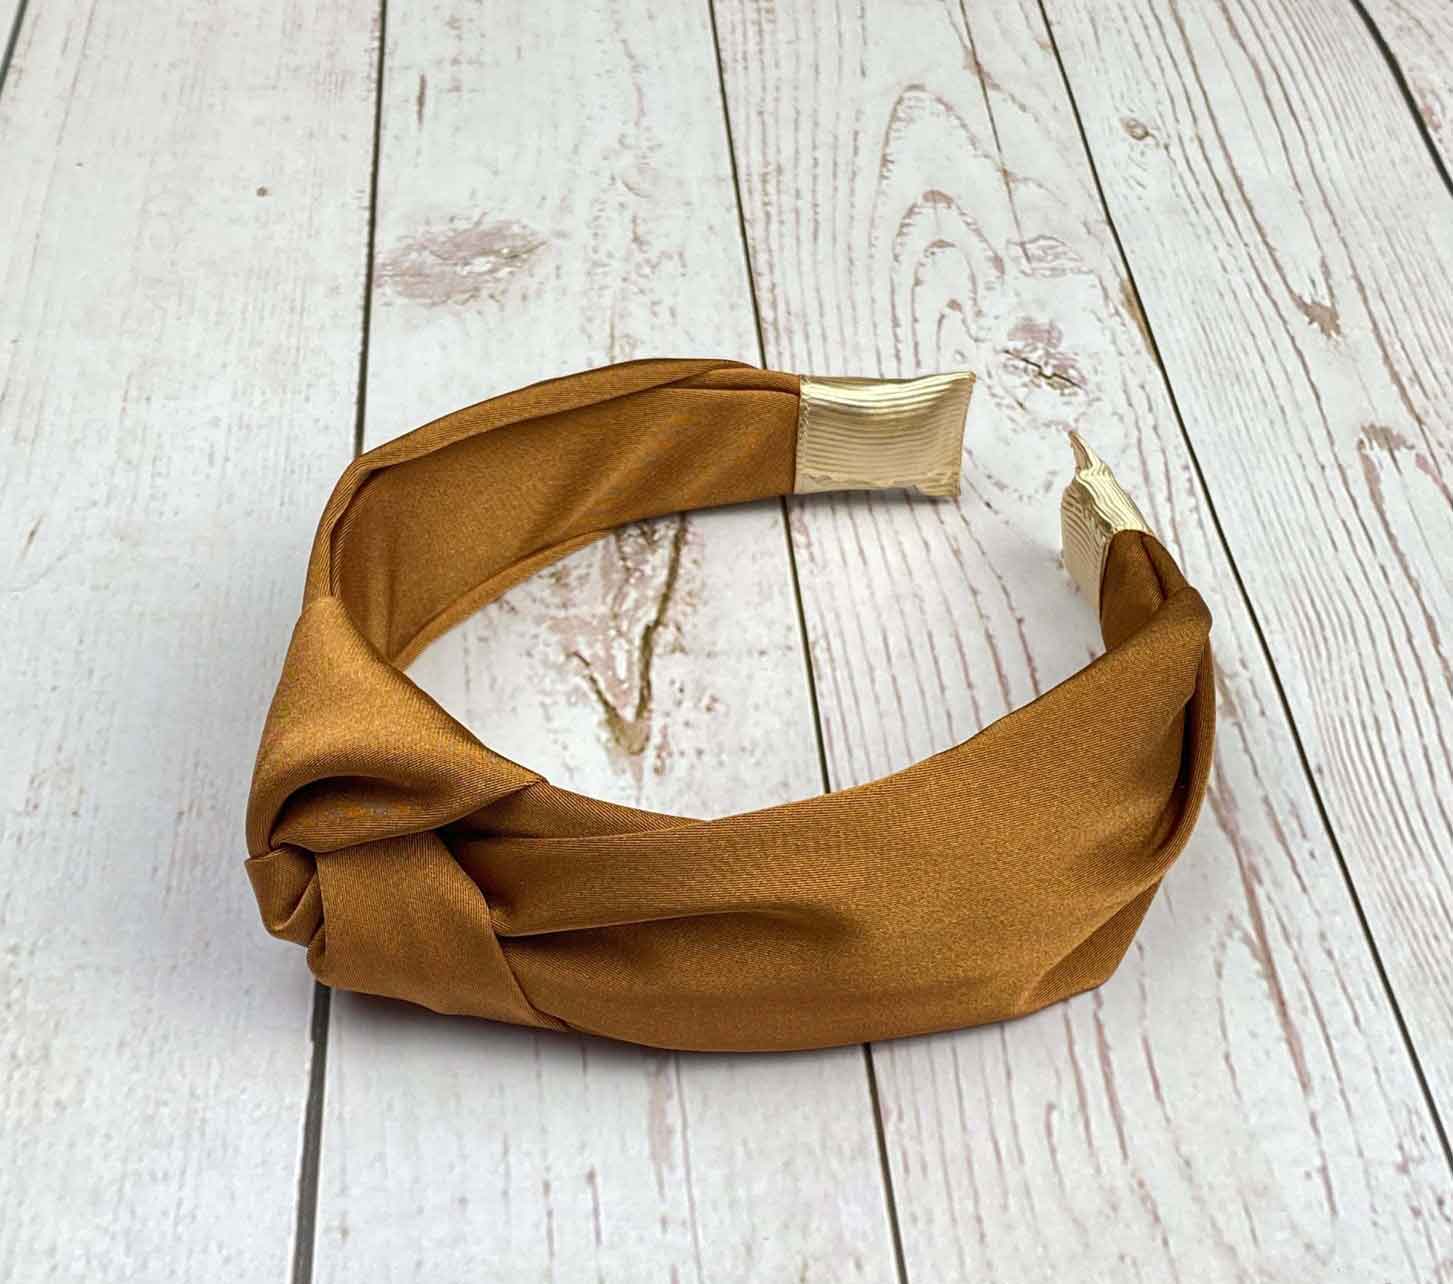 Copper Color Chic Satin Headband, Knotted Headband, Women Stylish Headband, Headband for Woman, Brown Color Fashion Hairband without Padded